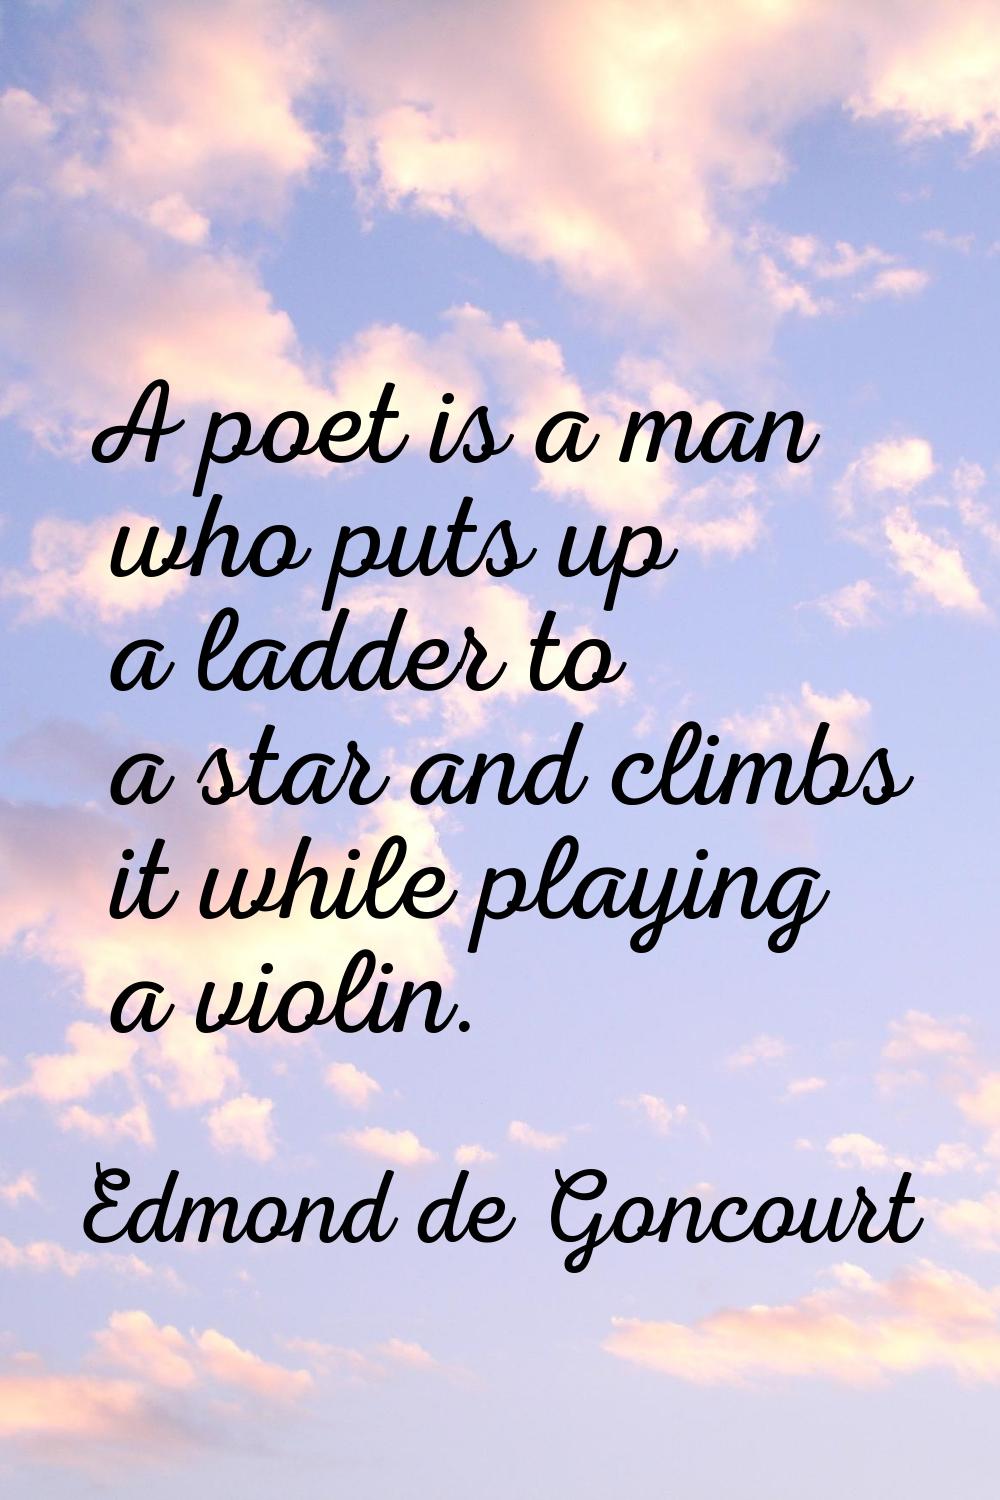 A poet is a man who puts up a ladder to a star and climbs it while playing a violin.